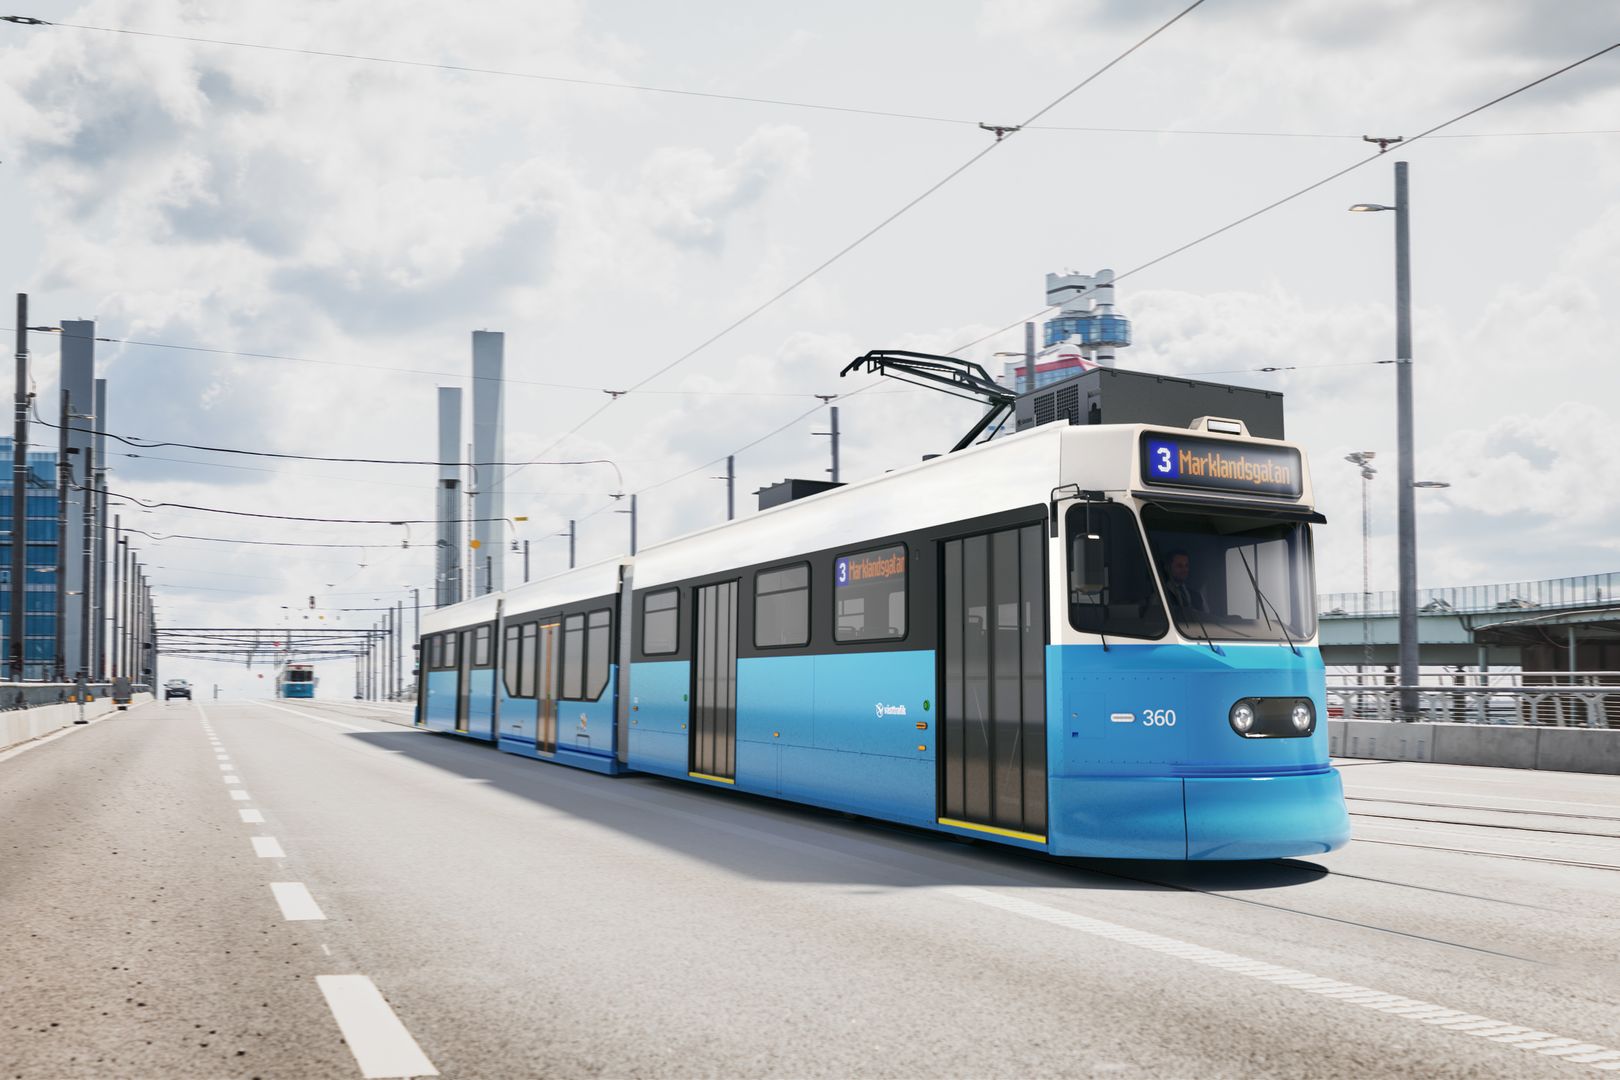 A visualisation of the modernised tram